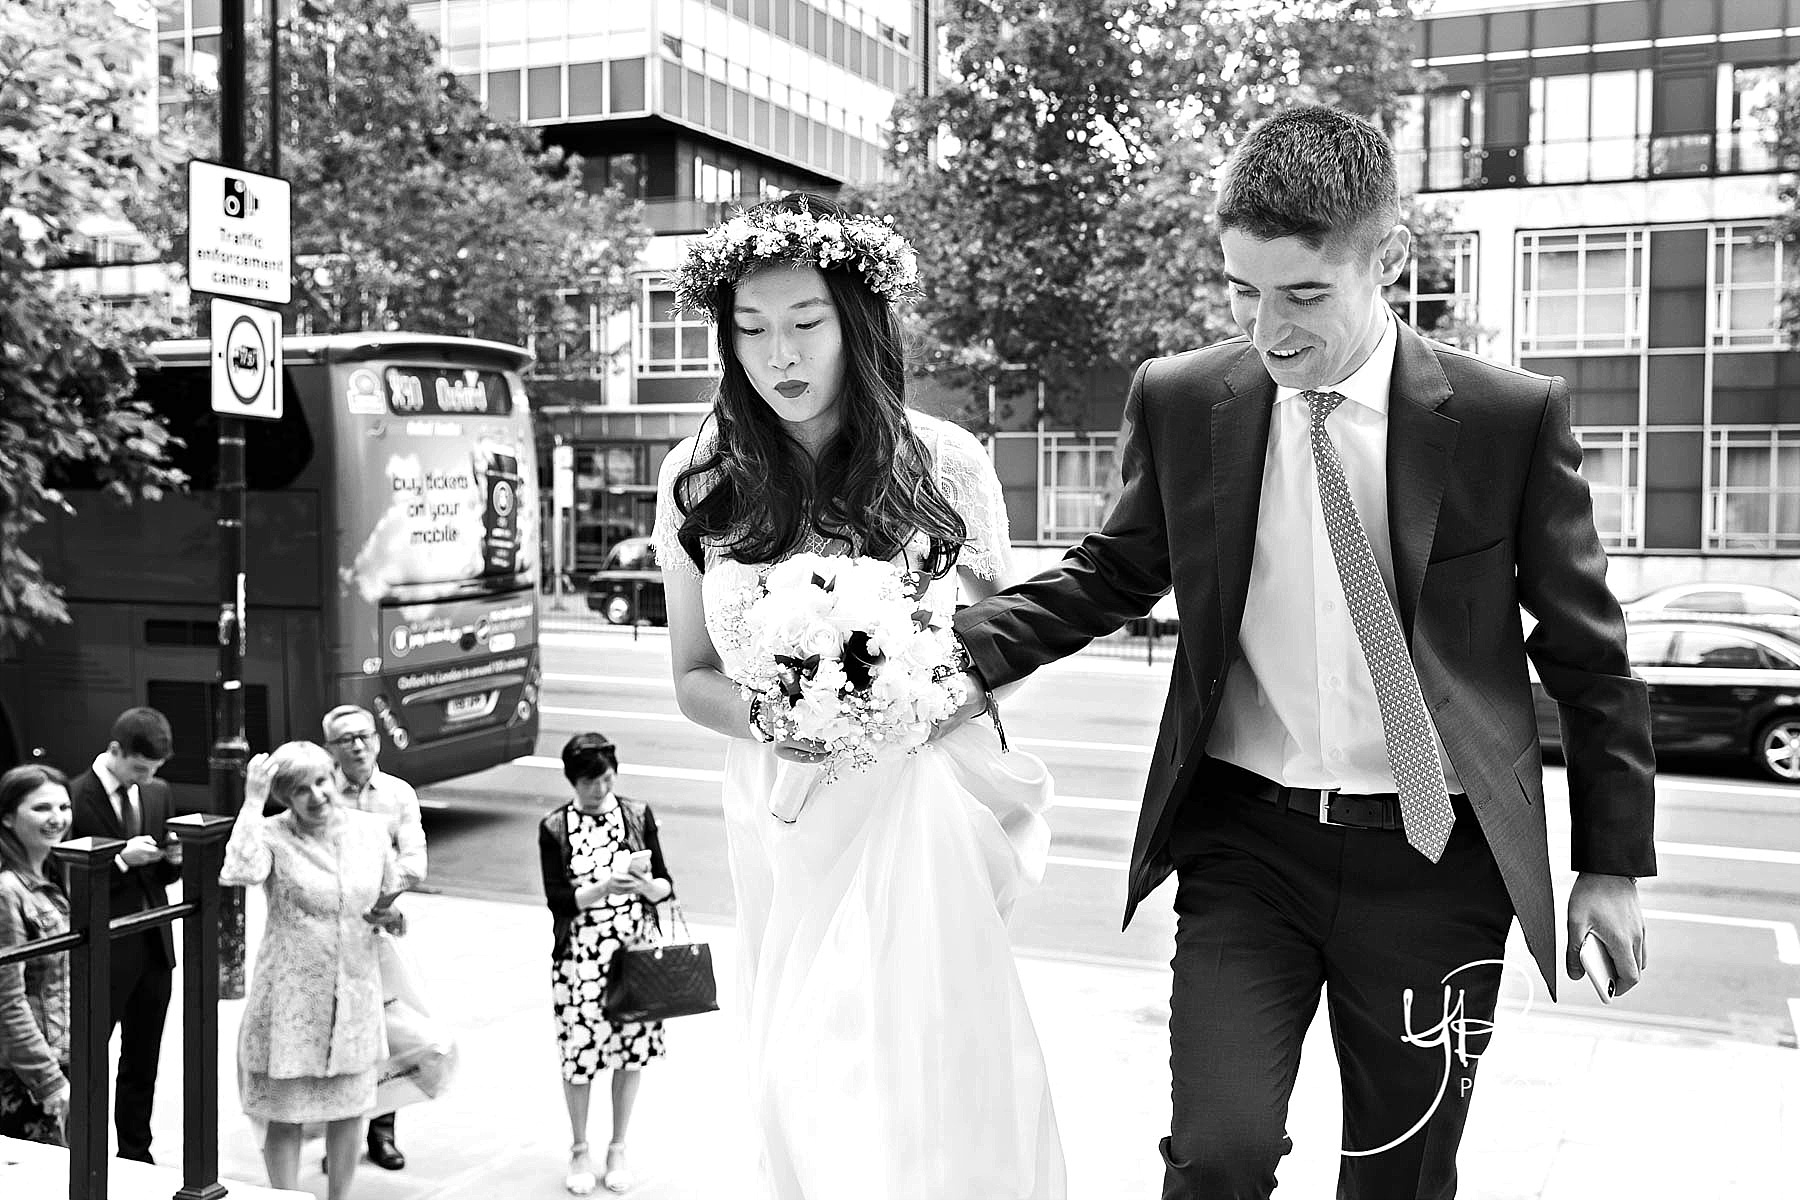 A bride and groom arrive for their Soho Room civil marriage ceremony, with the bride wearing a flower crown.